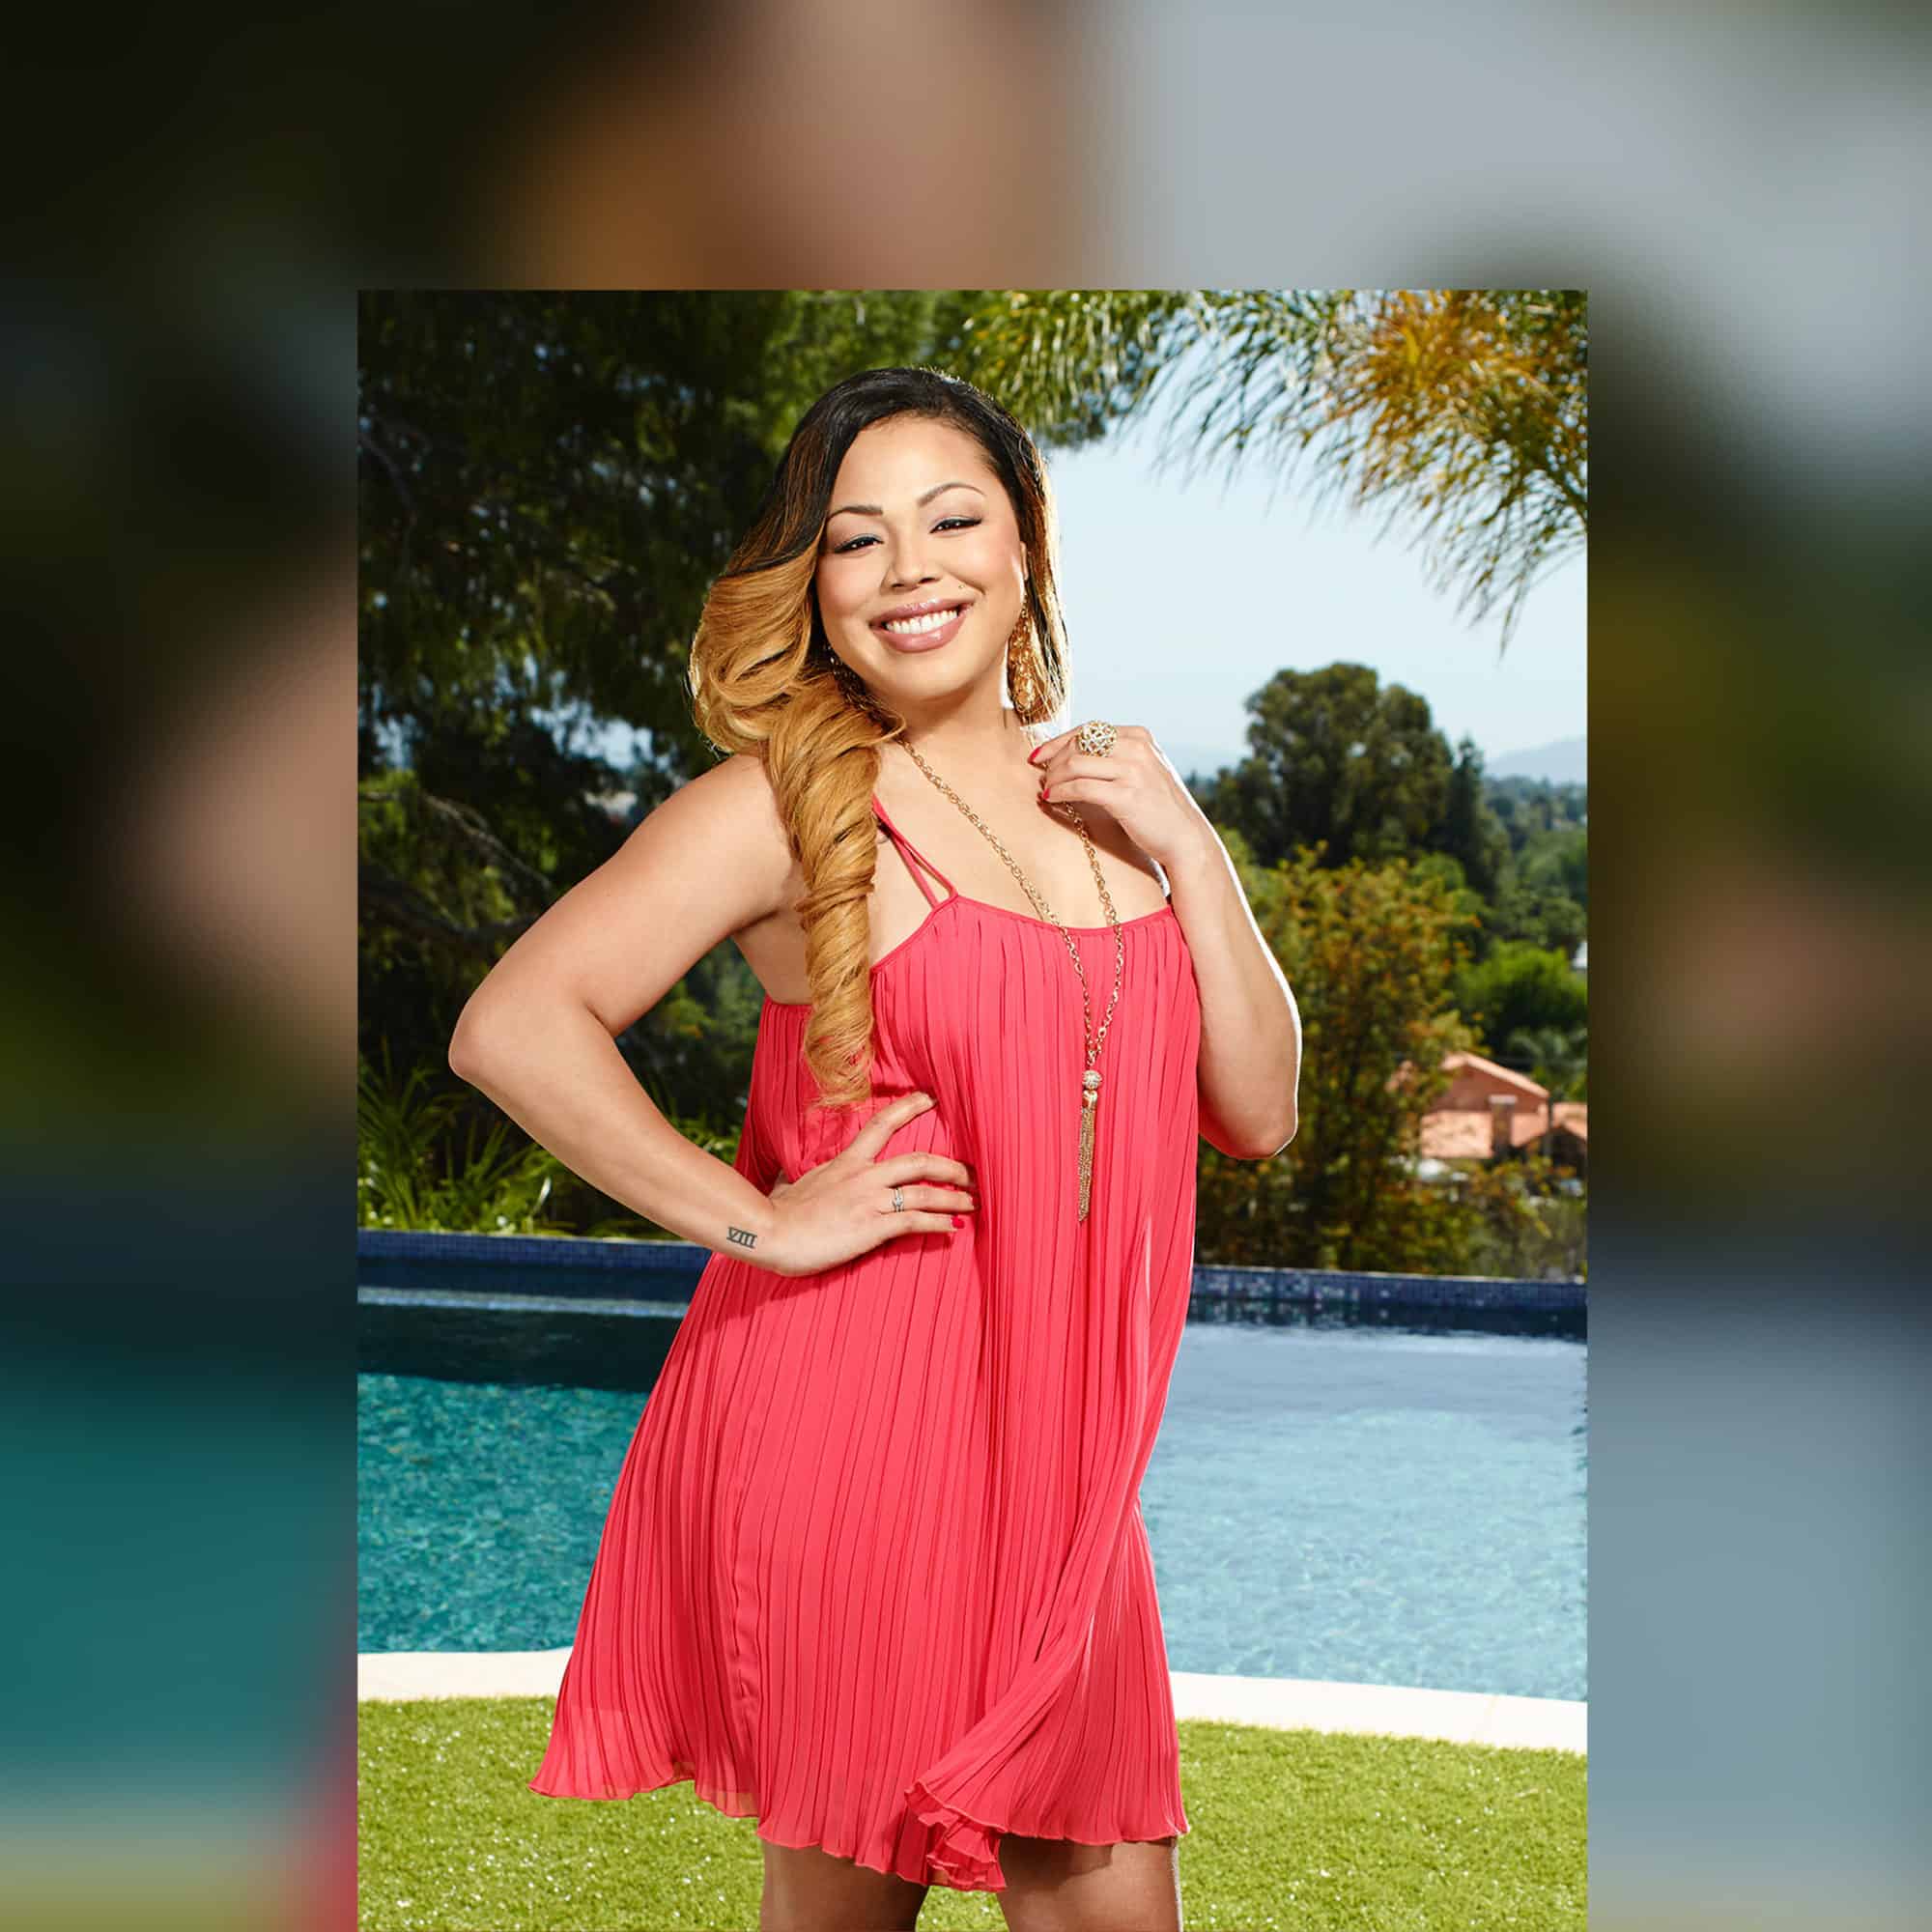 ‘Bad Girls Club’ Vet Judi Jackson Calls Out The Women Of ‘Real Housewives’–“Those Girls Are In Their 50s & 60s” (Video)